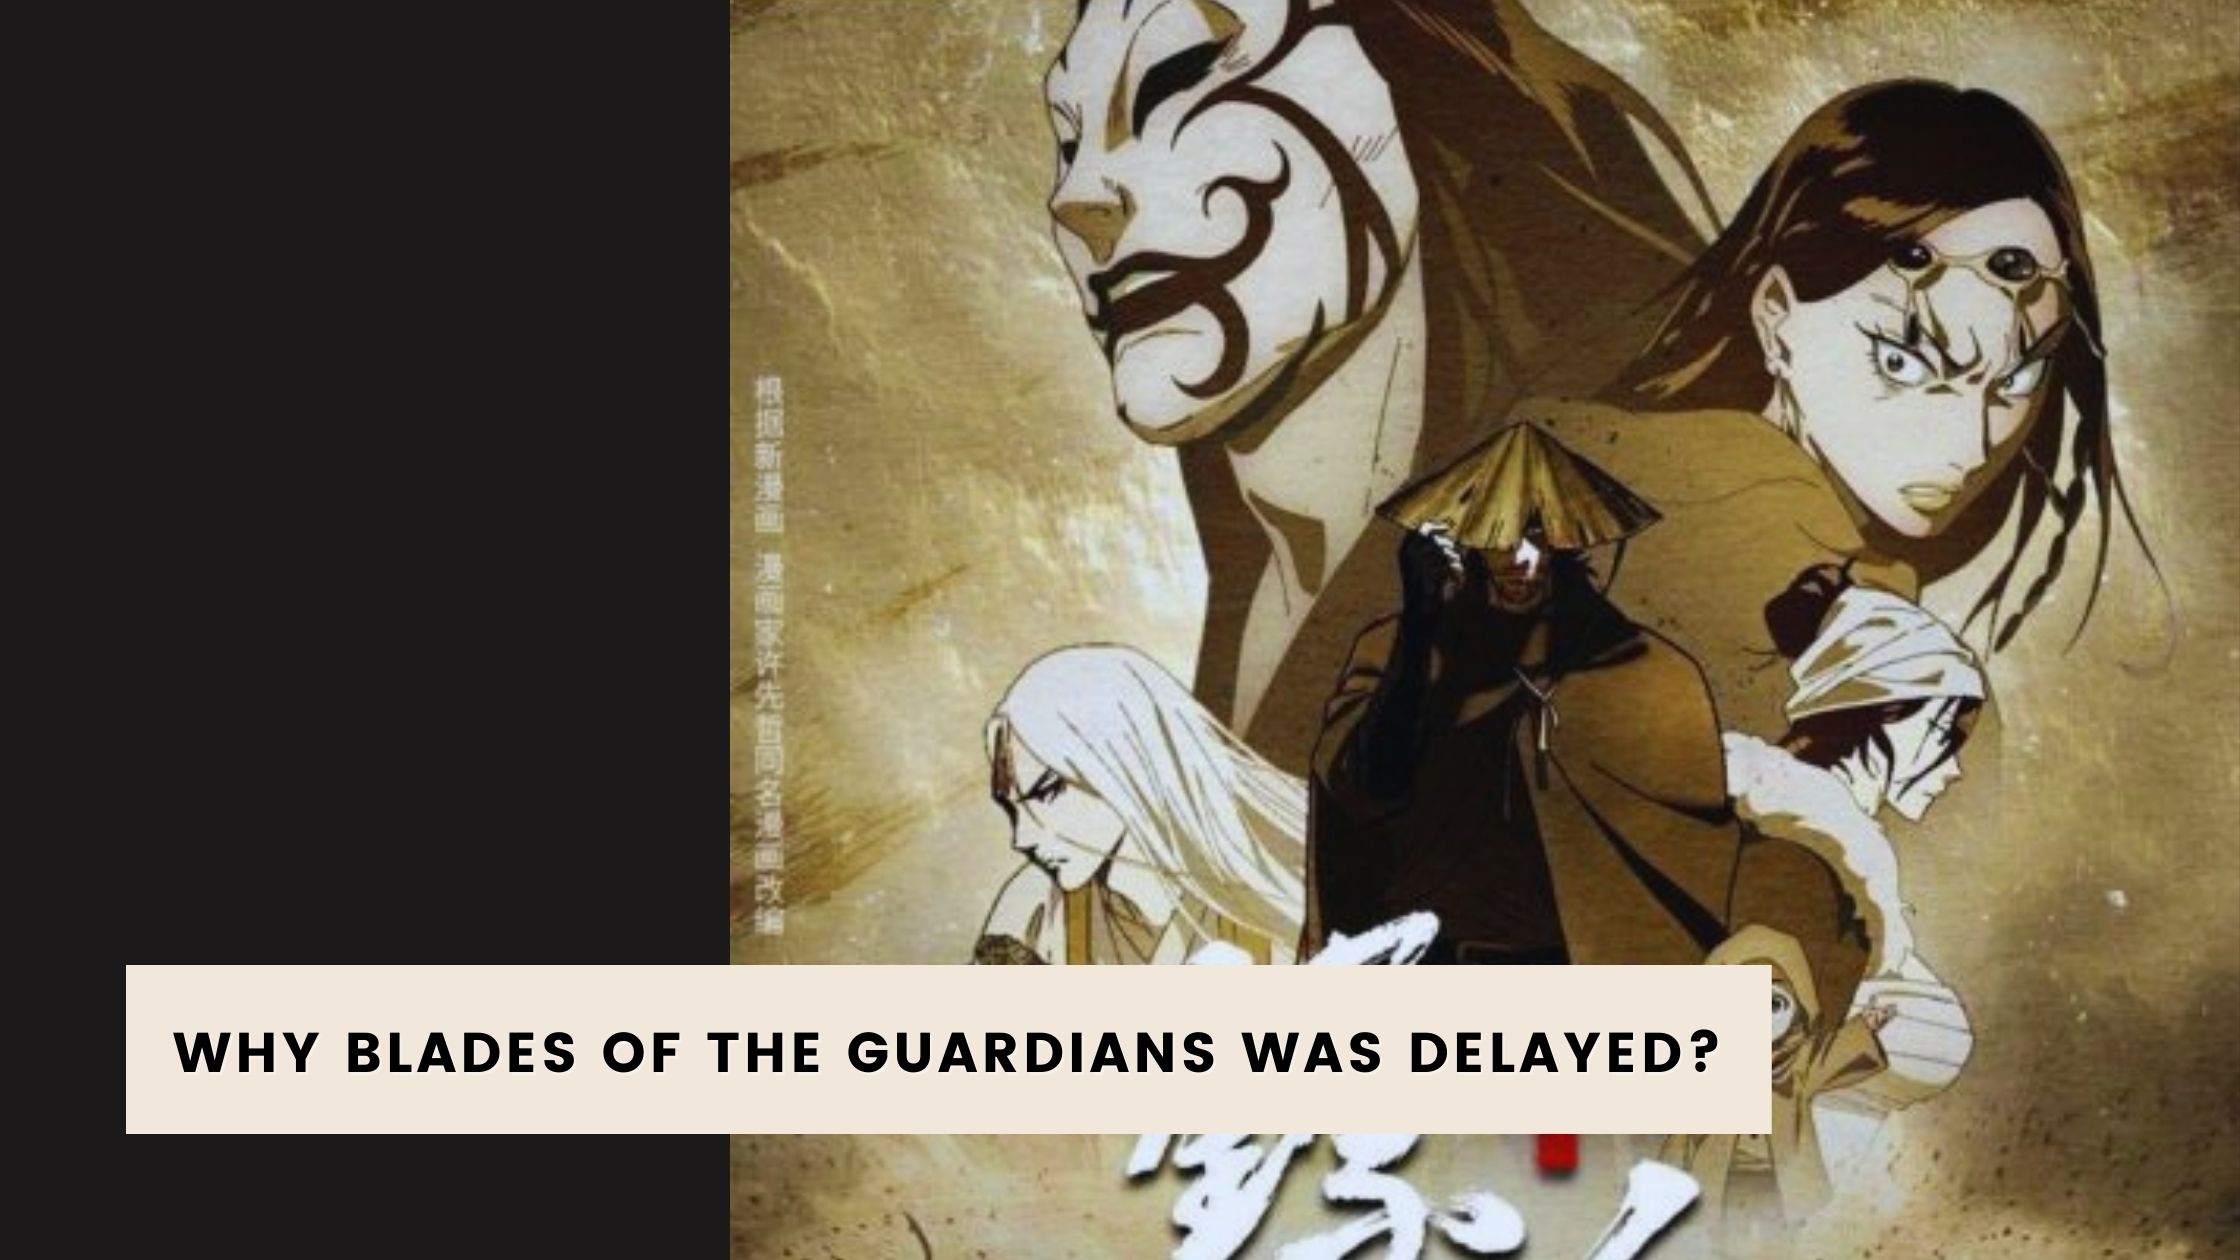 Biao Ren Blades Of The Guardians Episode 11 Release Date Preview   Viewing Details Revealed